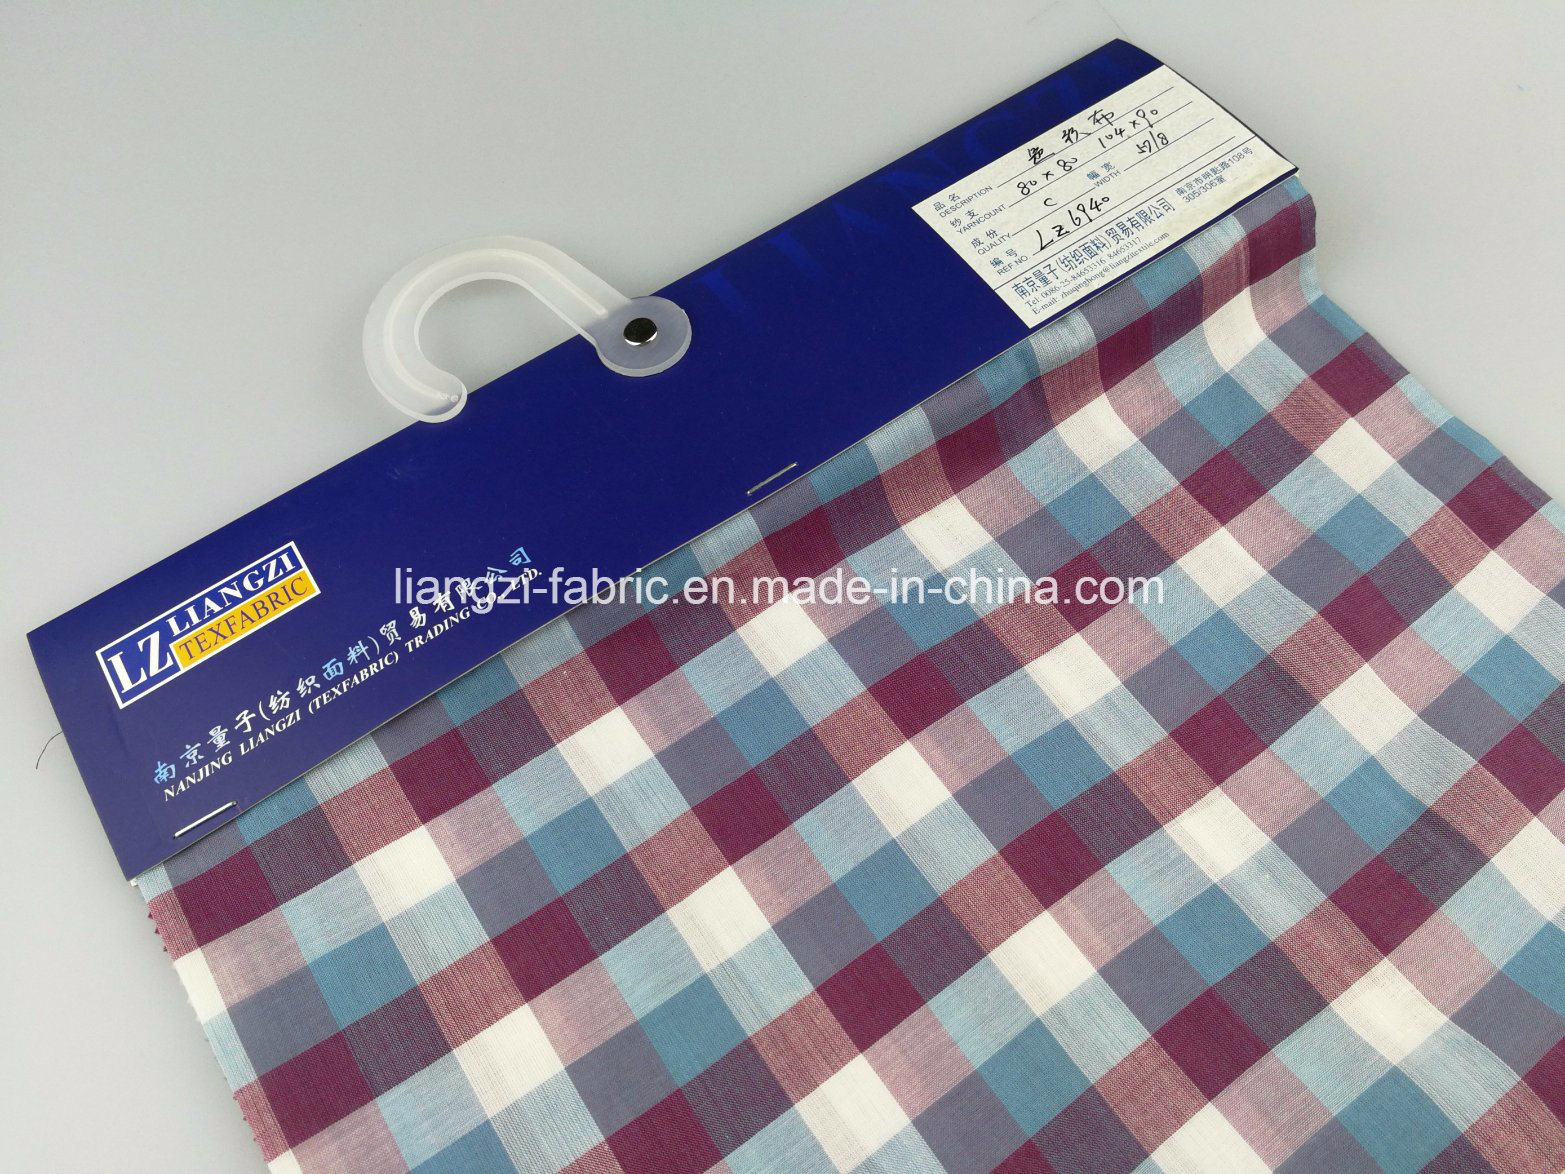 Yarn Dyed Voile Fabric-Lz6940